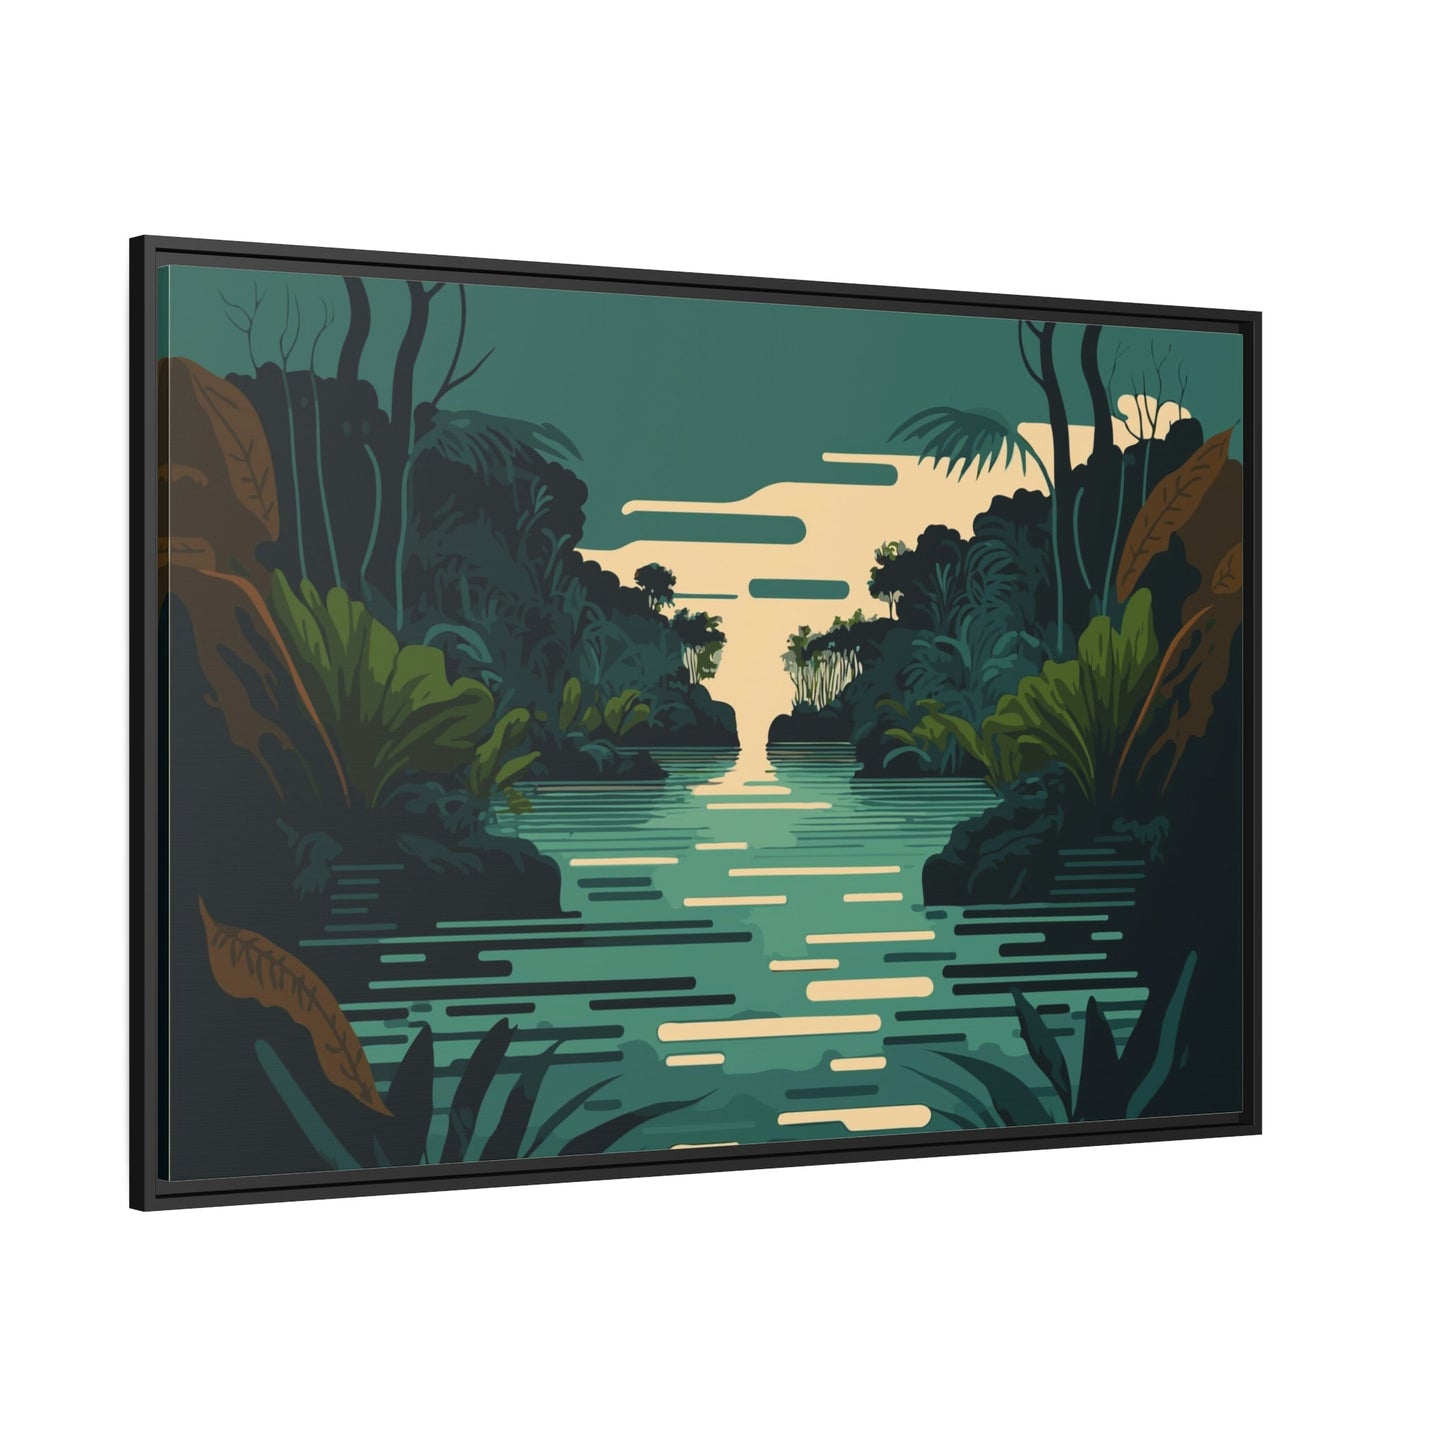 Tranquil Waterside: Wall Art of a Picturesque Lakeside on Natural Canvas